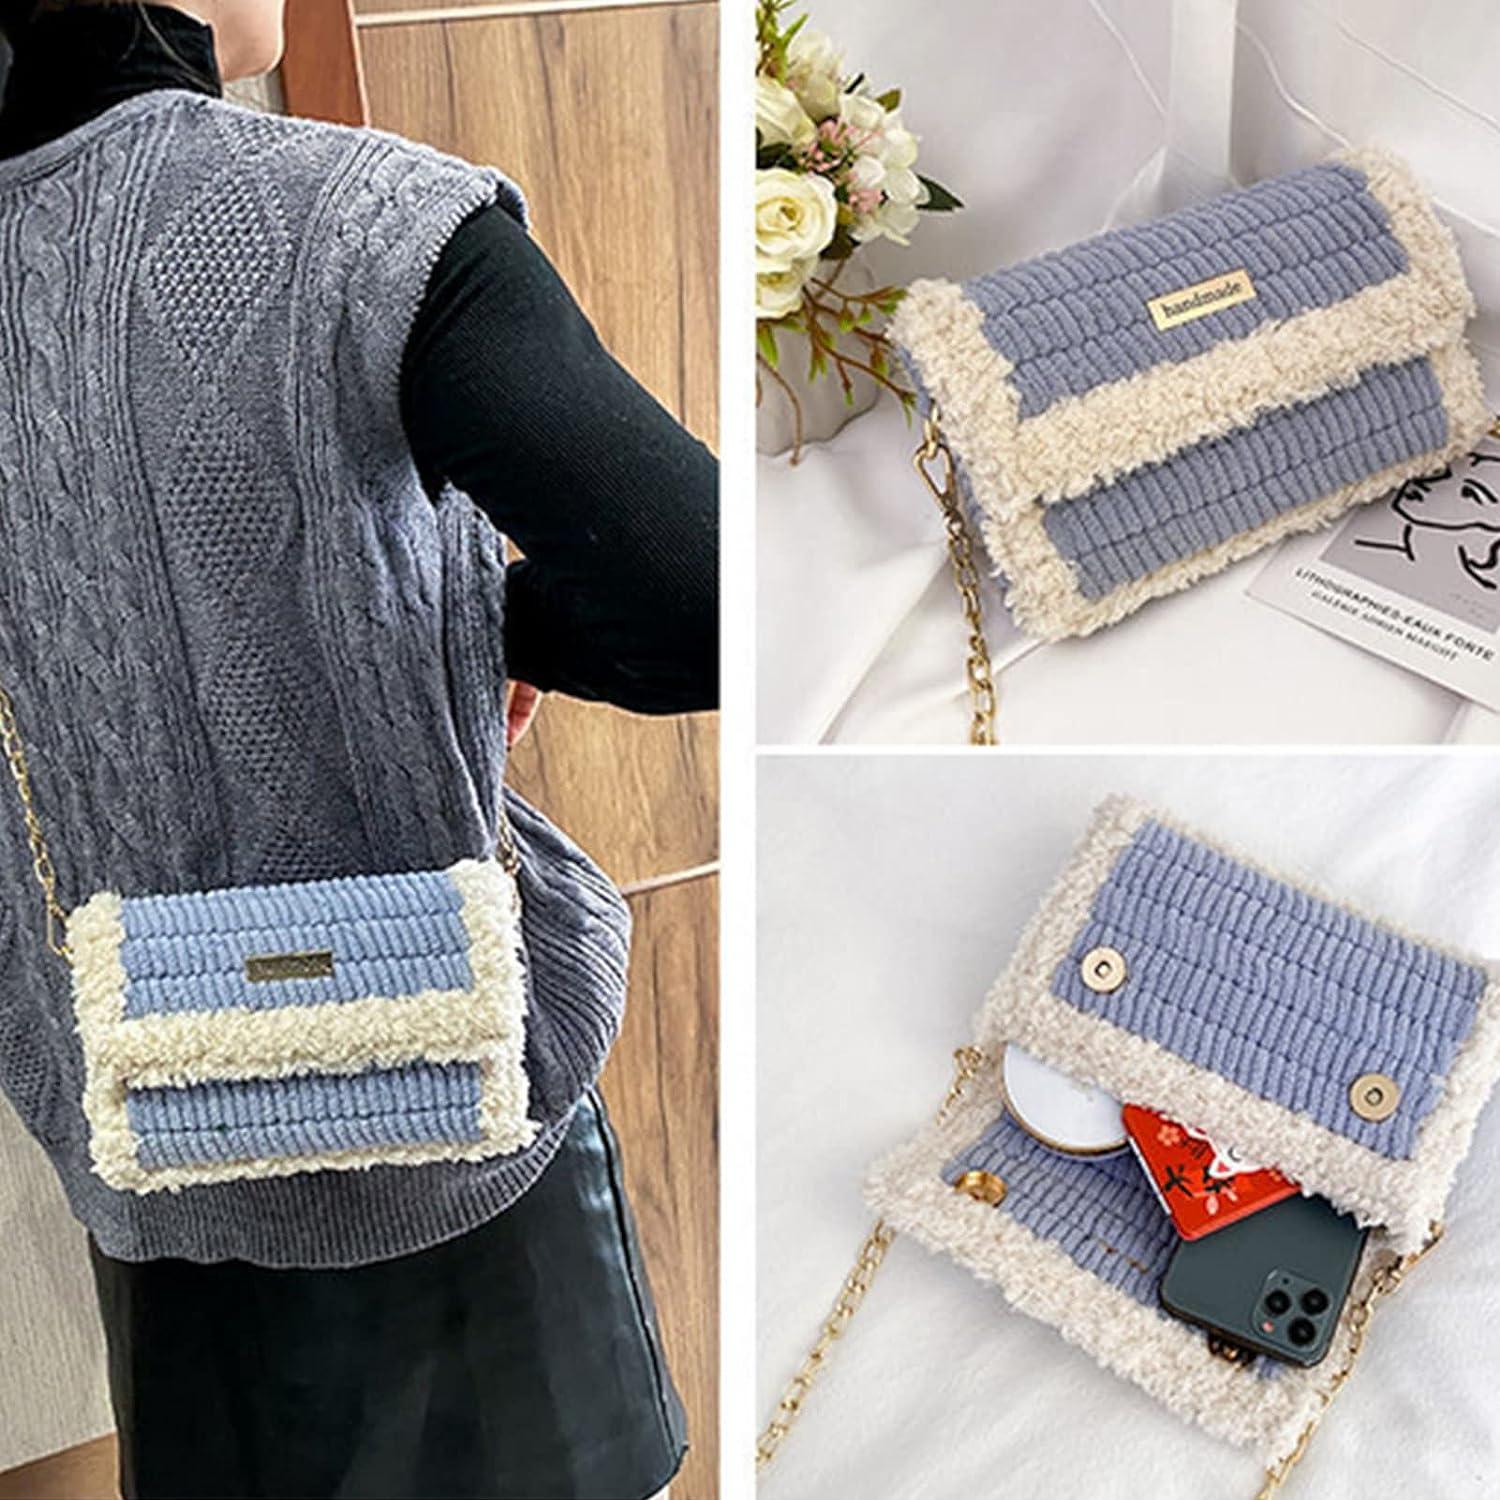 Free Plastic Canvas Purse and Tote Patterns | Needlepointers.com